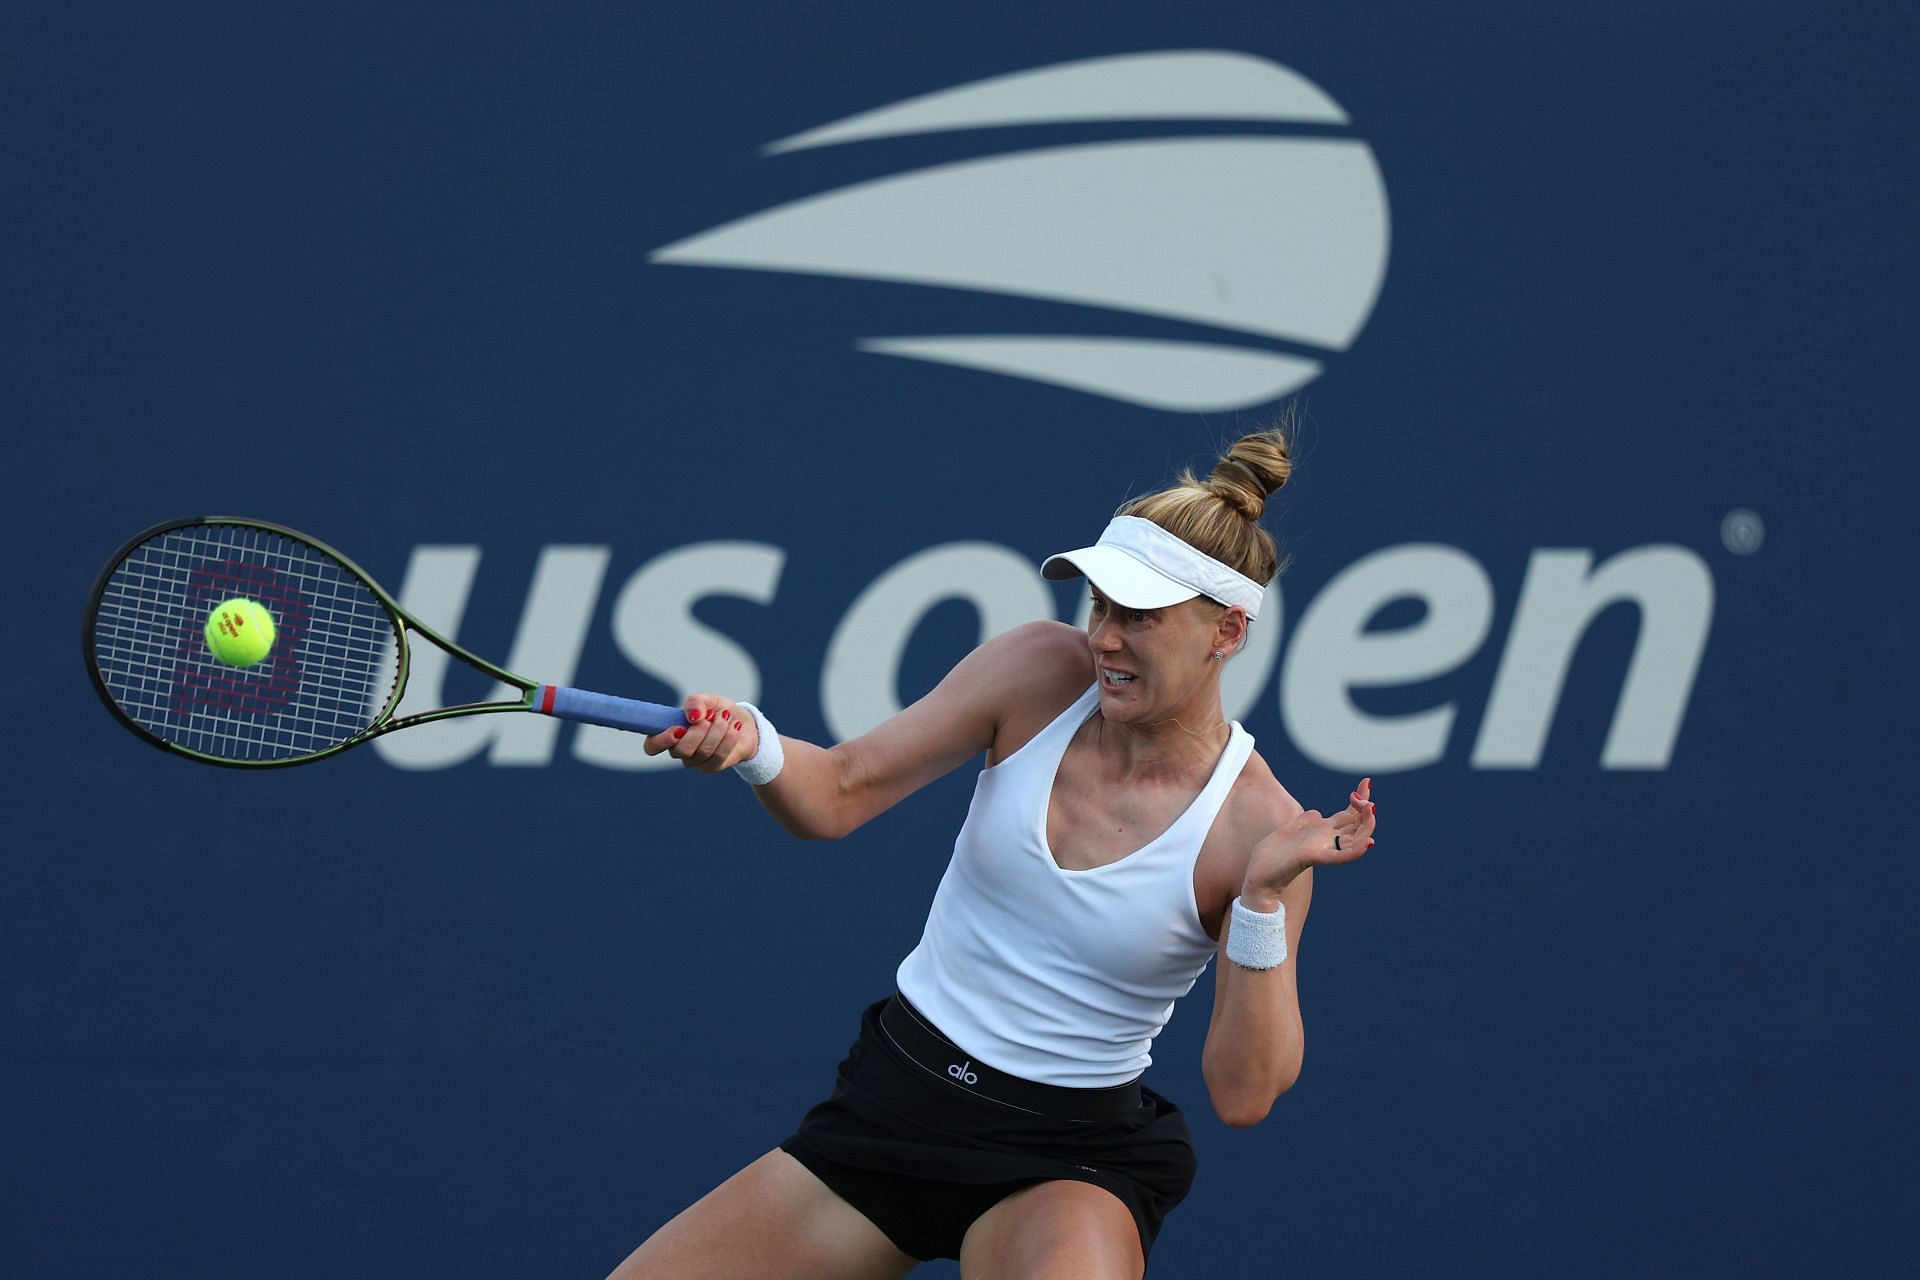 Alison Riske will fight for a place in the quarterfinals of the US Open